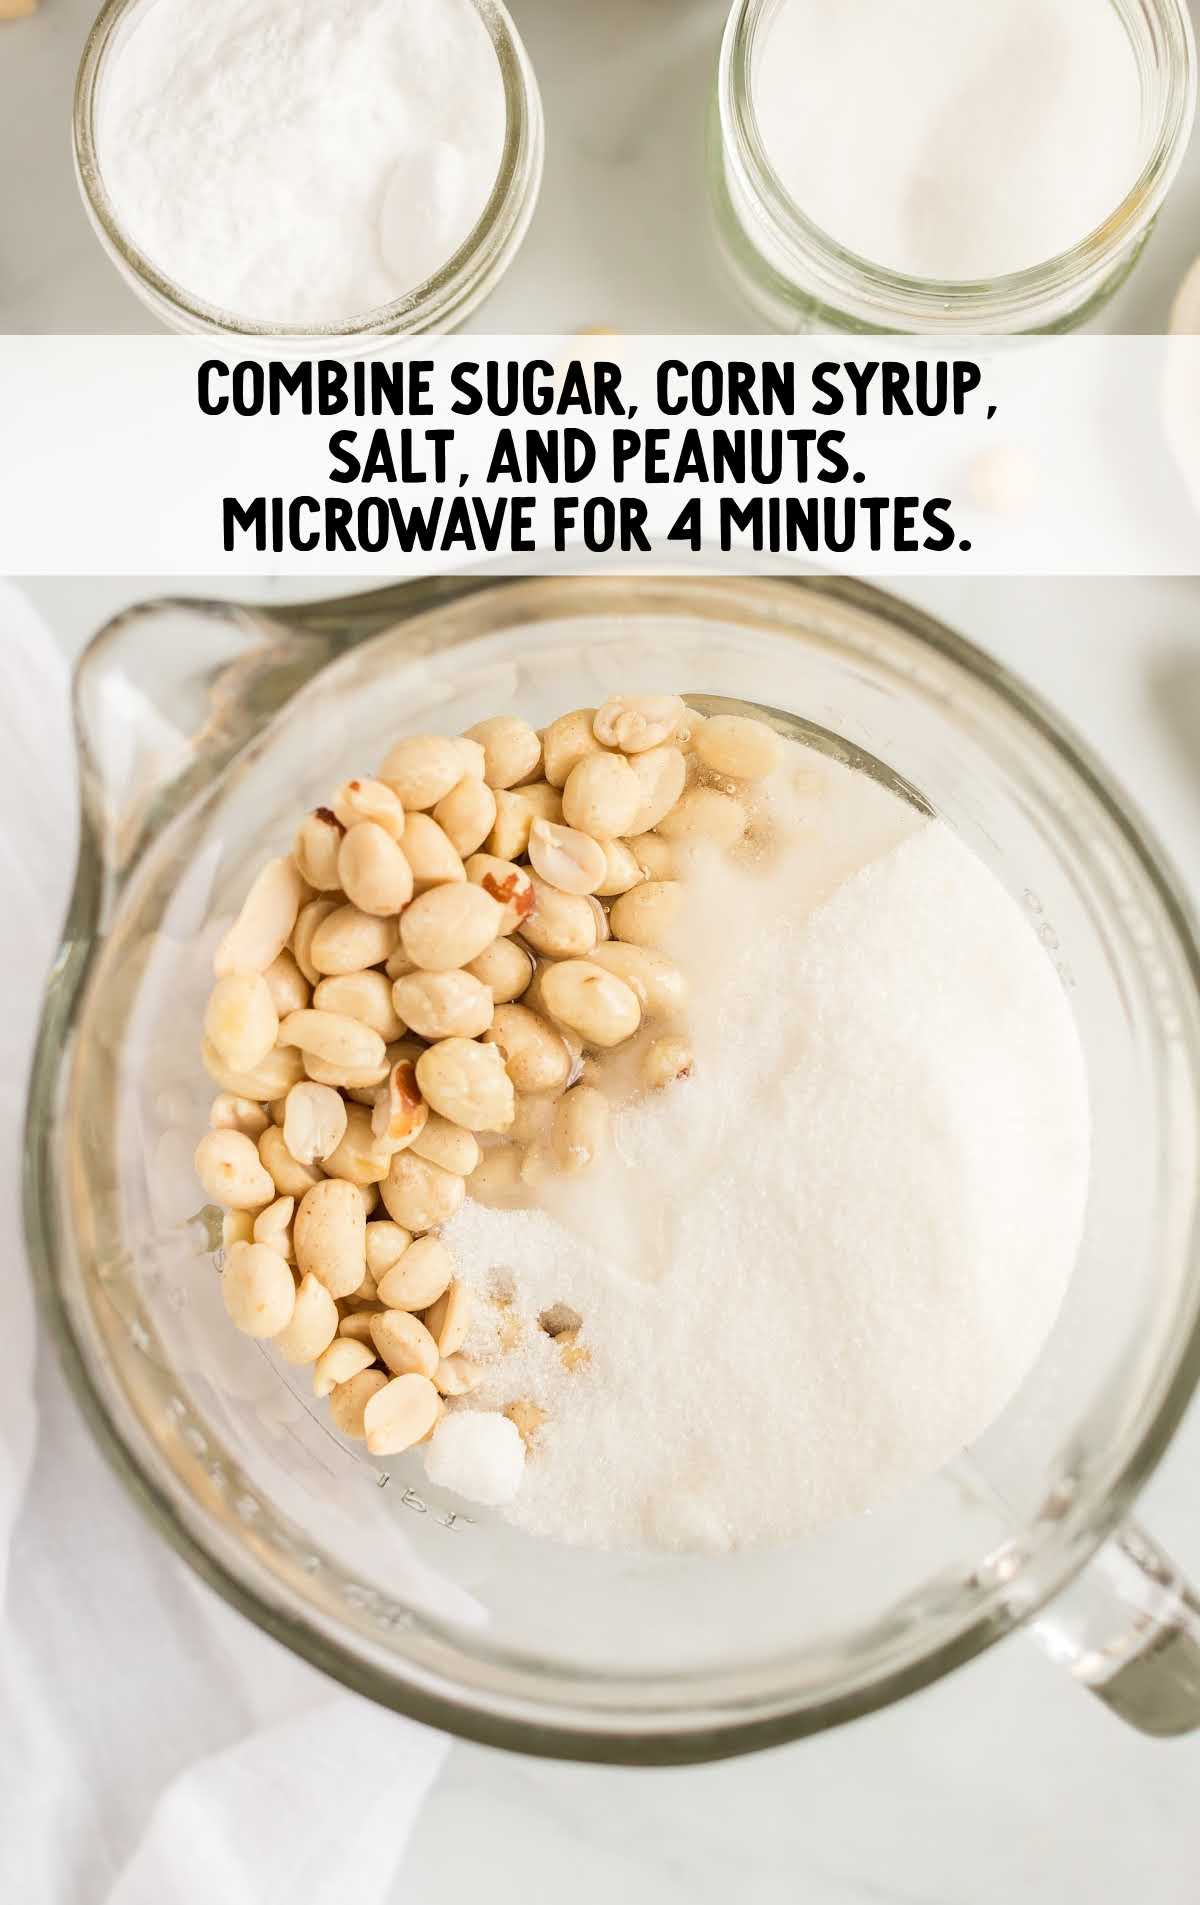 sugar, corn syrup, salt, peanuts combined in a cup